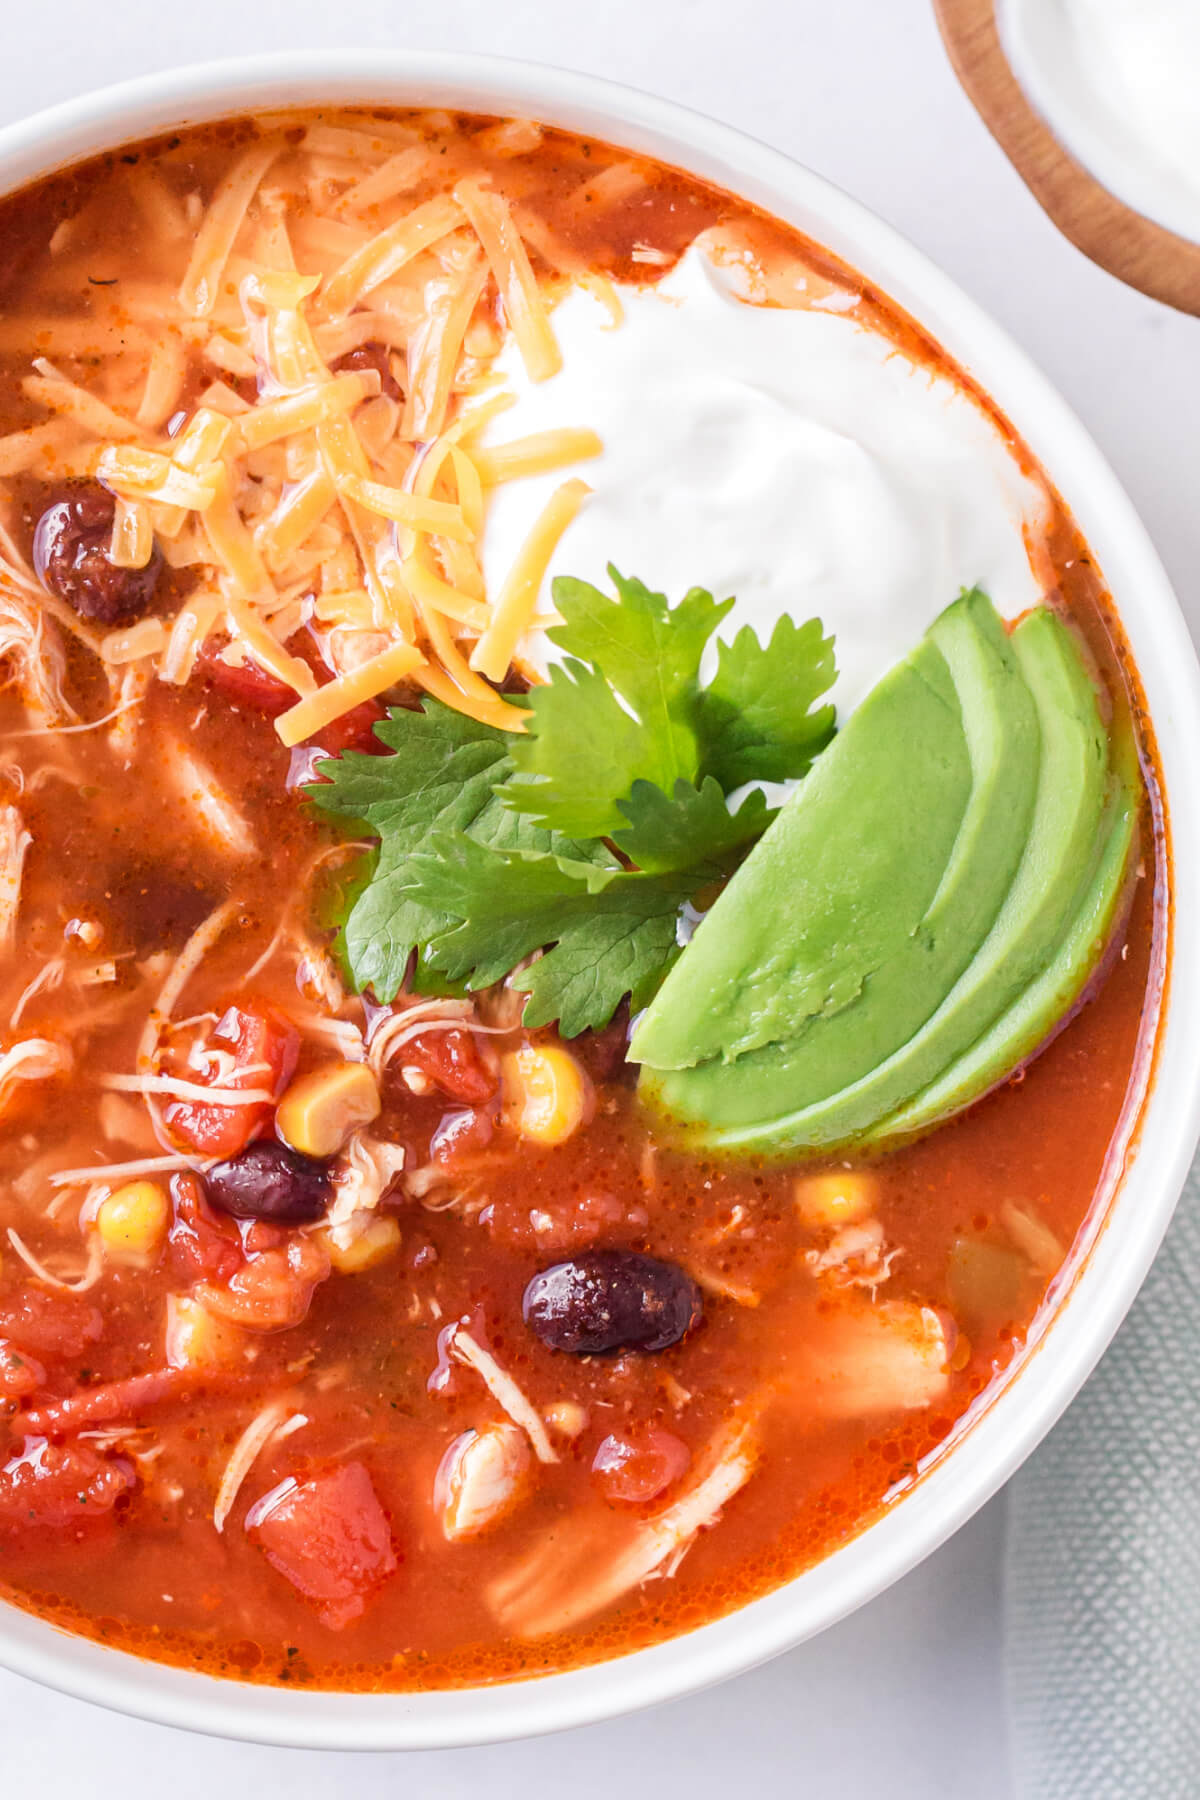 A white bowl filled a serving of Instant Pot enchilada soup that's garnished with avocado slices, sour cream, shredded cheese, and cilantro.